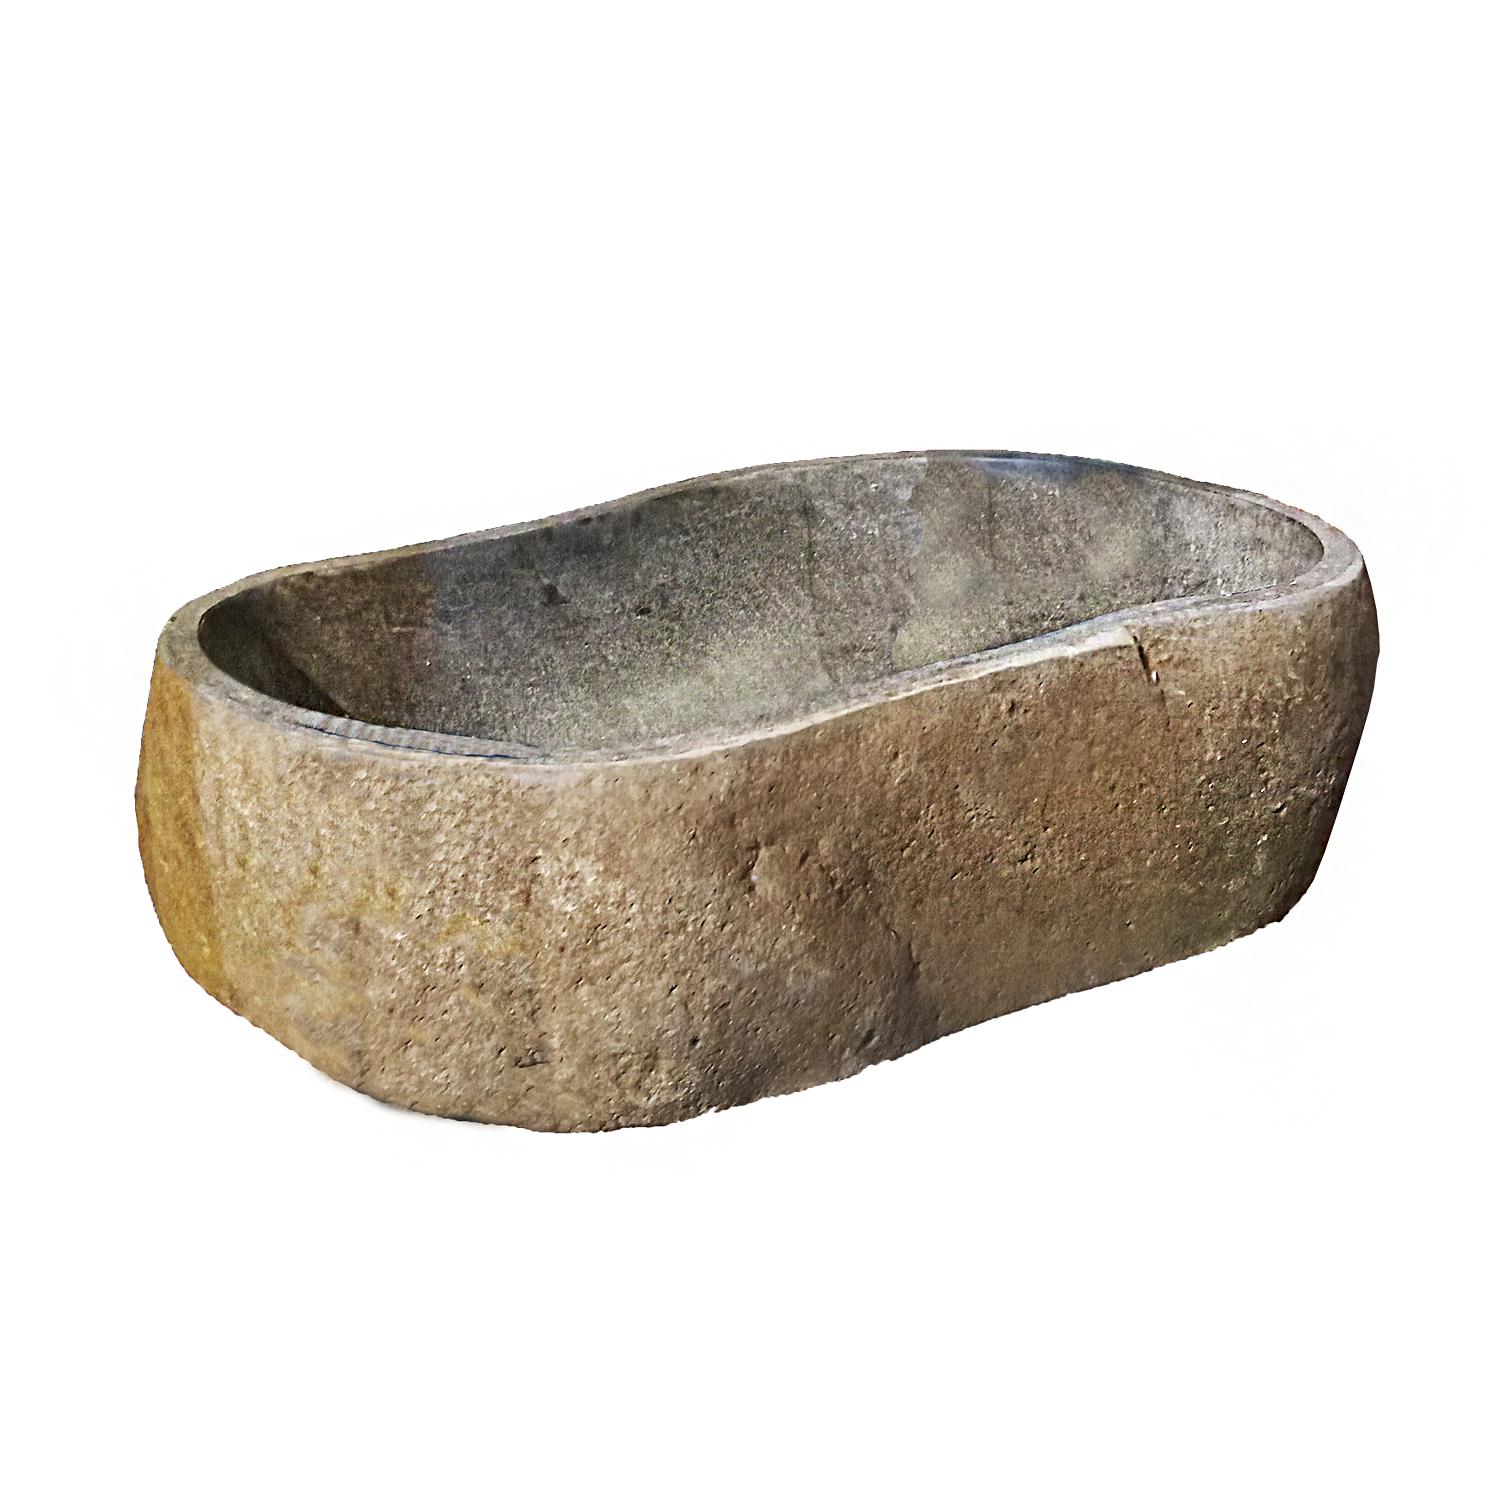 A solid stone sink or basin, hand-crafted in Indonesia. 
Hand-carved from volcanic rock, the outside of the piece preserves its naturally rugged stone texture, while the inside has been polished for a smooth, even and shiny surface. 

Can be used as